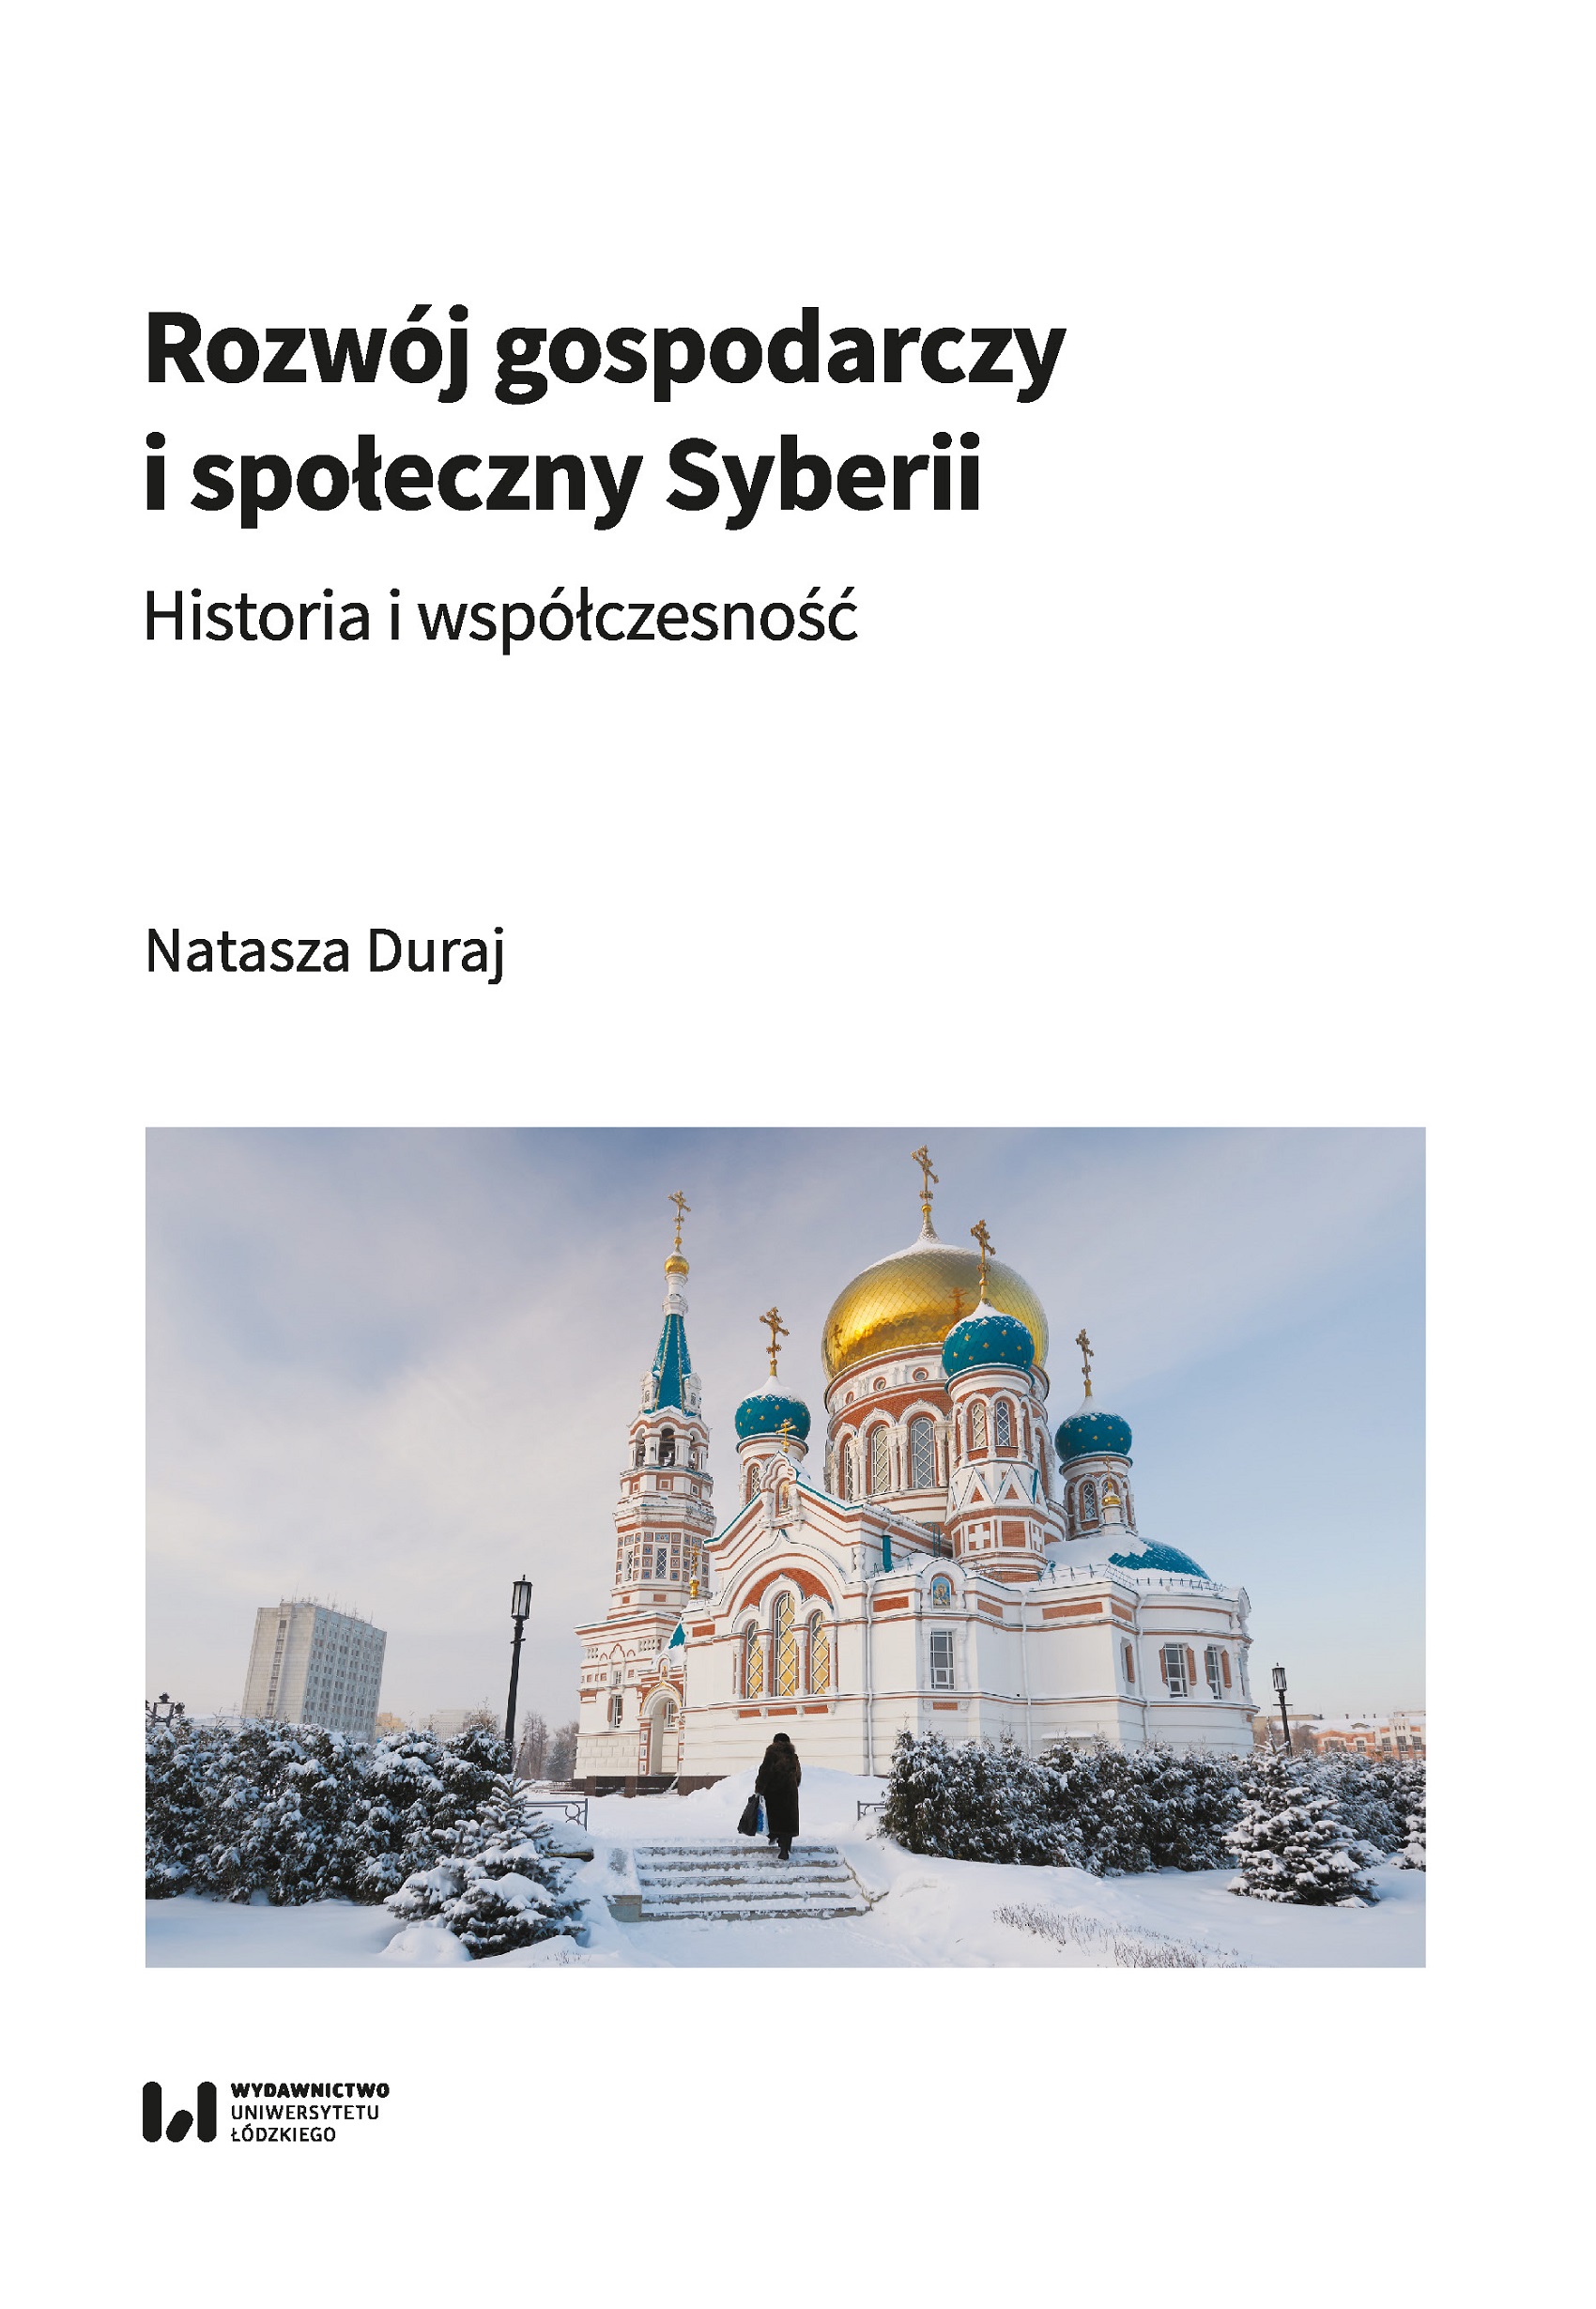 The final title of the publication: Economic and social development of Siberia. History and present